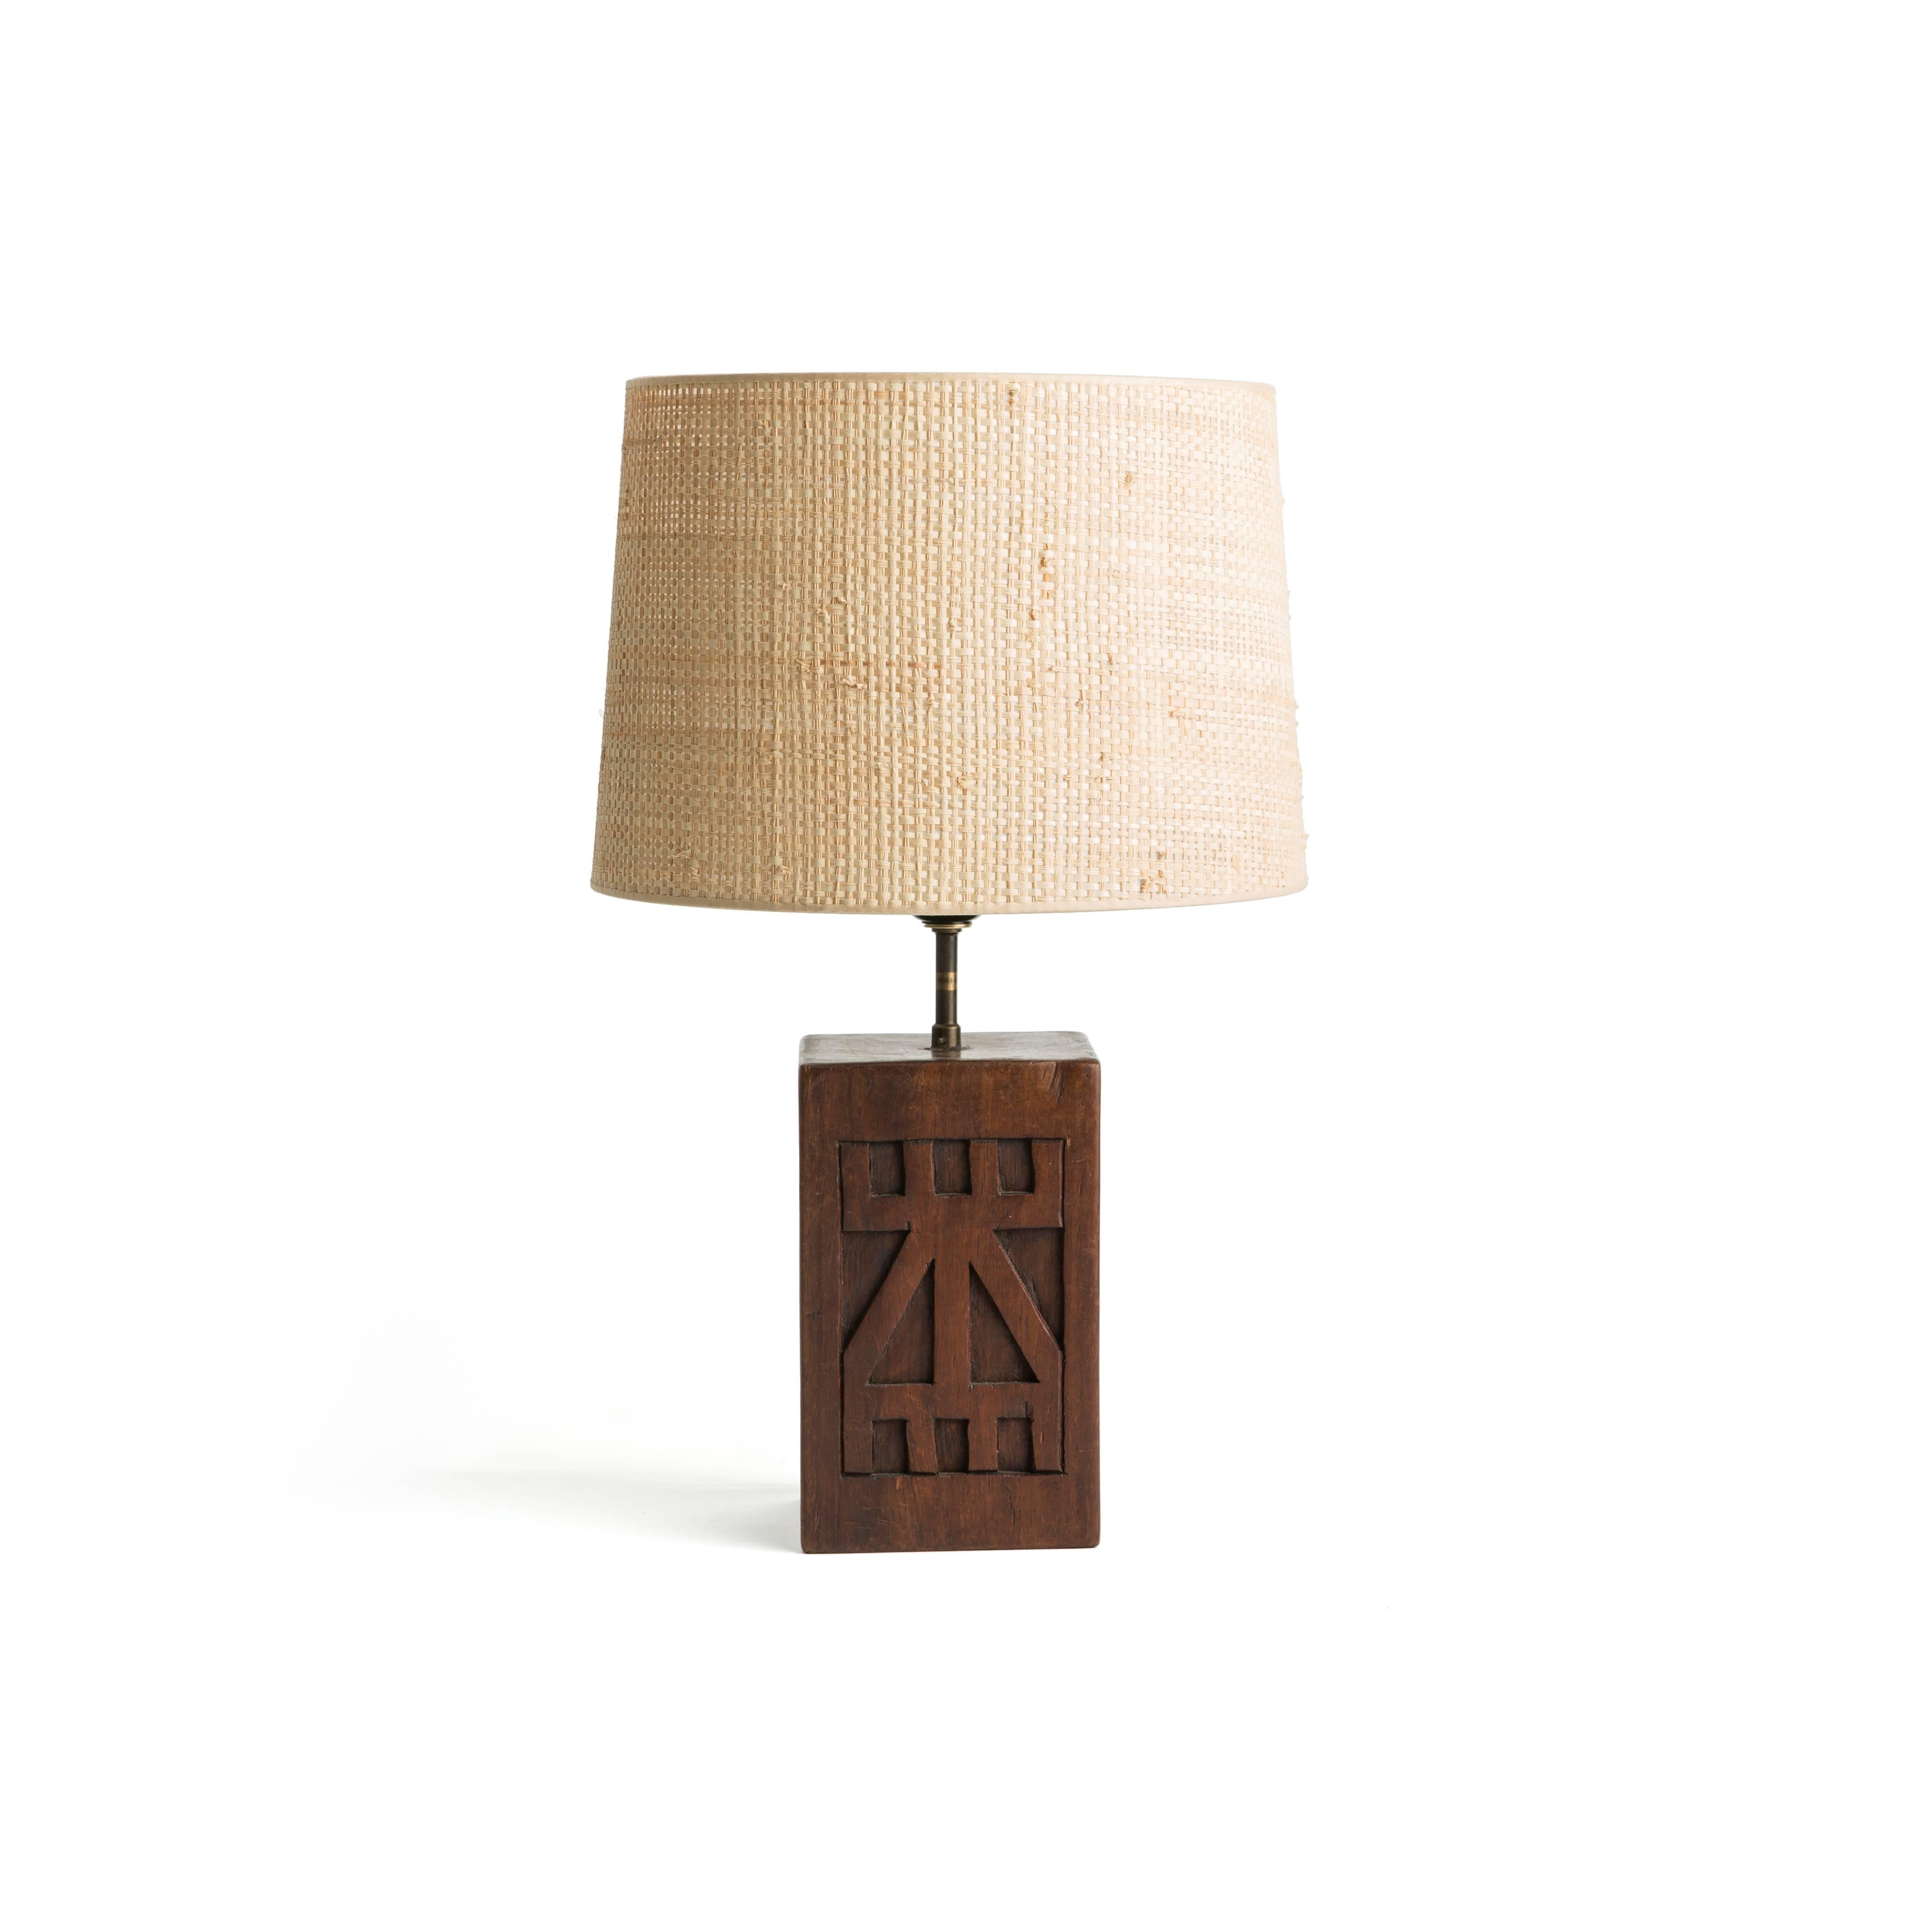 Hand-carved table lamp with a face on one side and a pattern on the opposite. 

Wired to US standards.

Woven shade included.